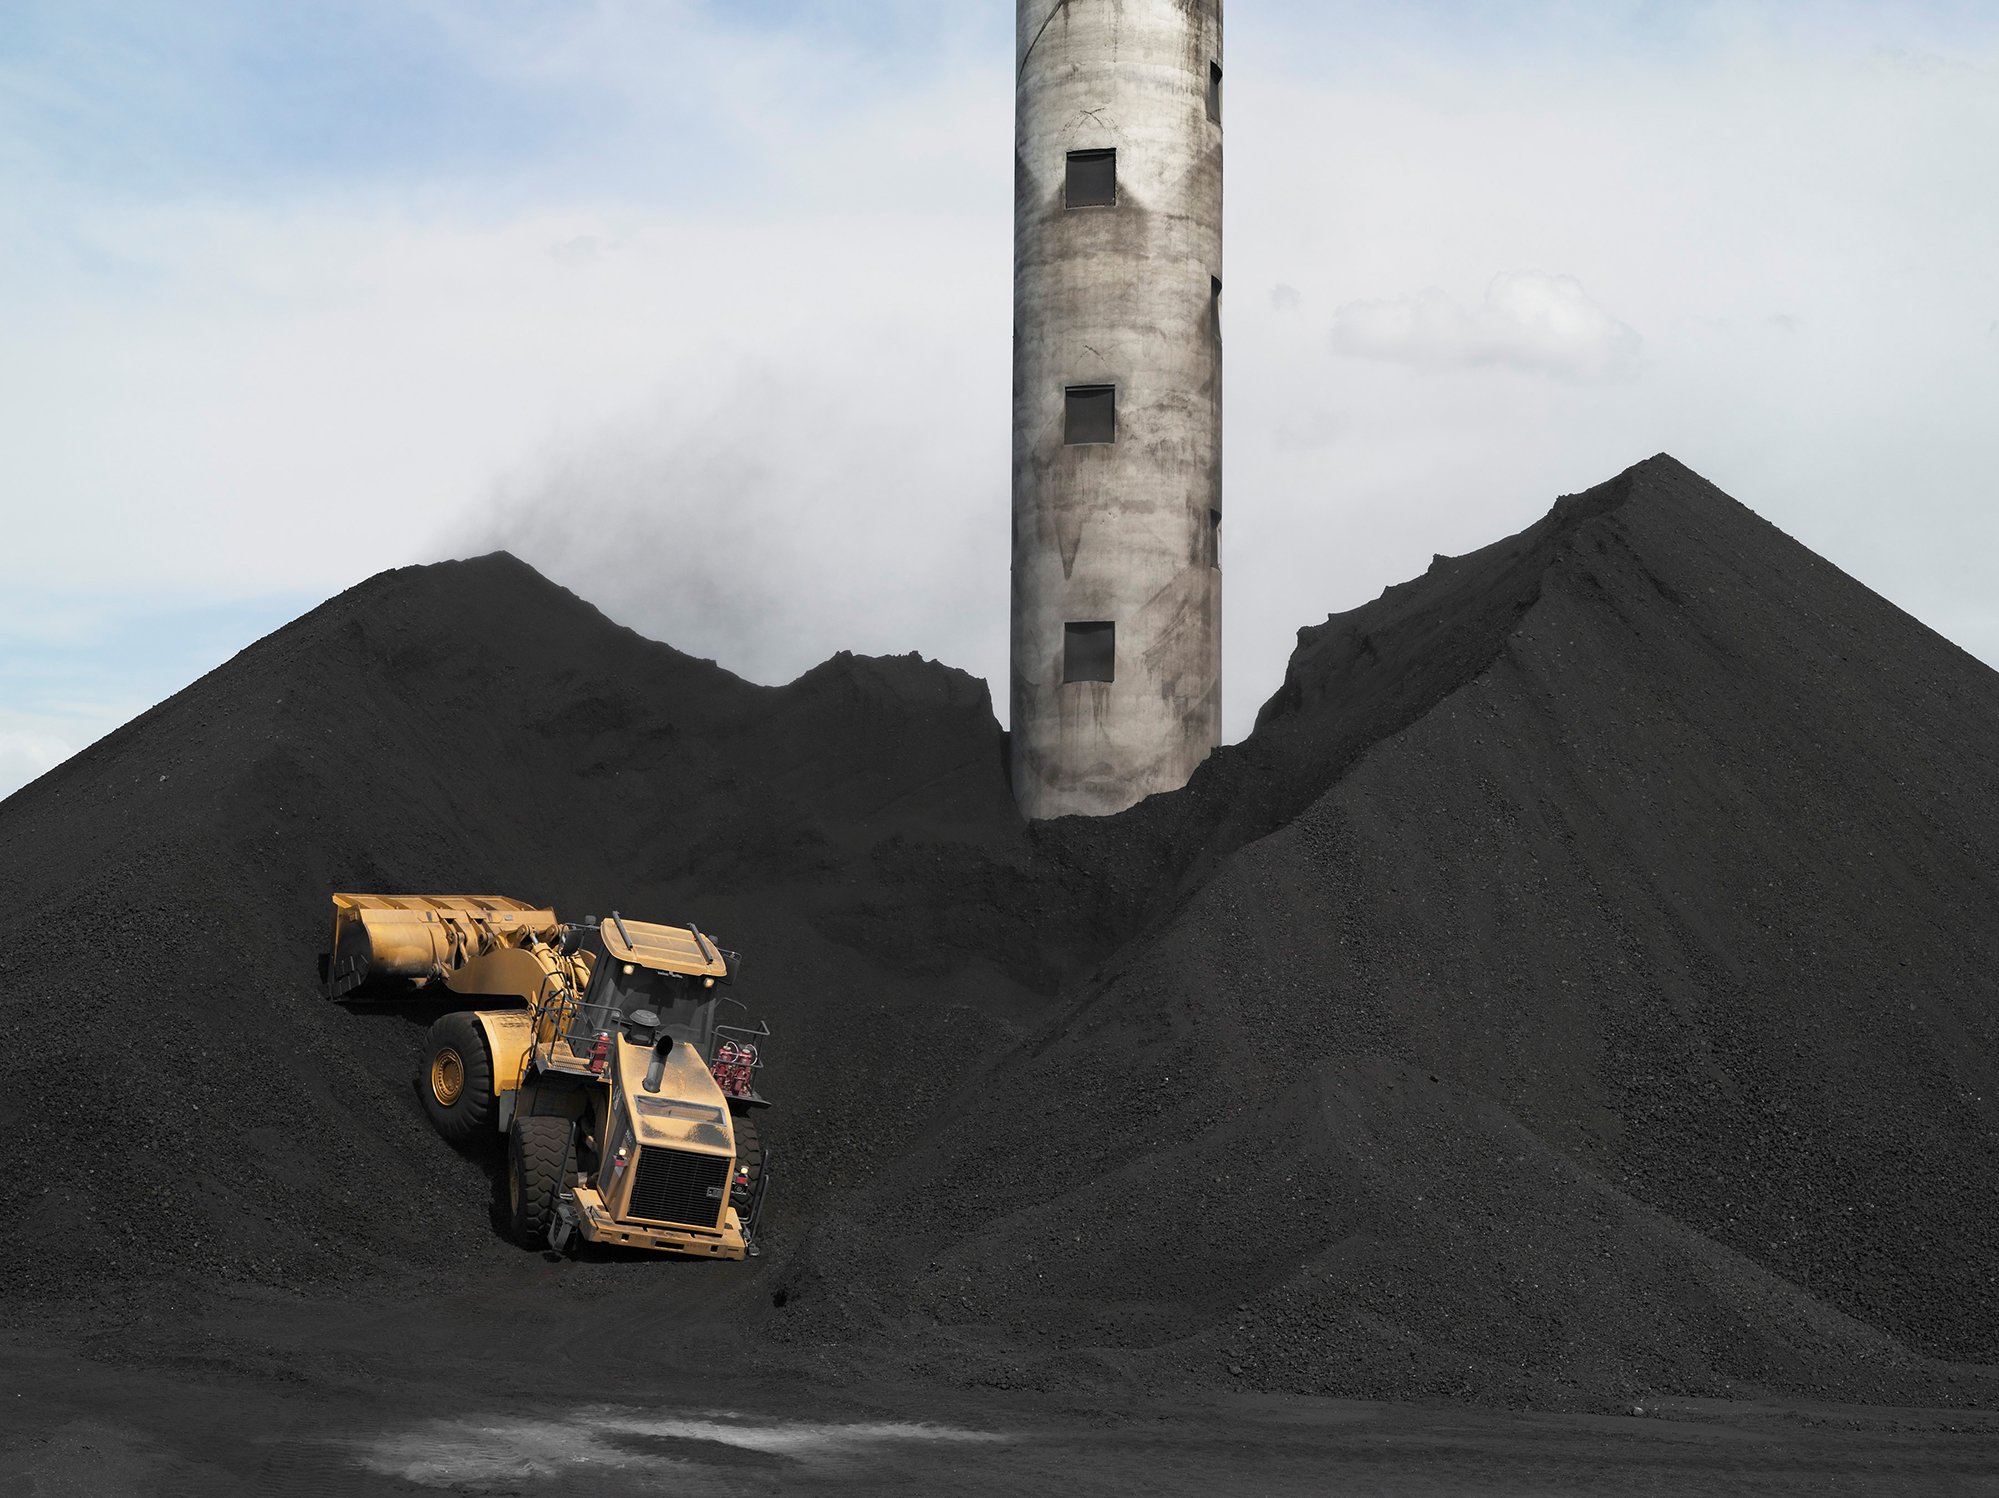 A scene of mountains of black soot. A concrete tower emerges from the pile and dirty front loader truck is climbing up the pile.